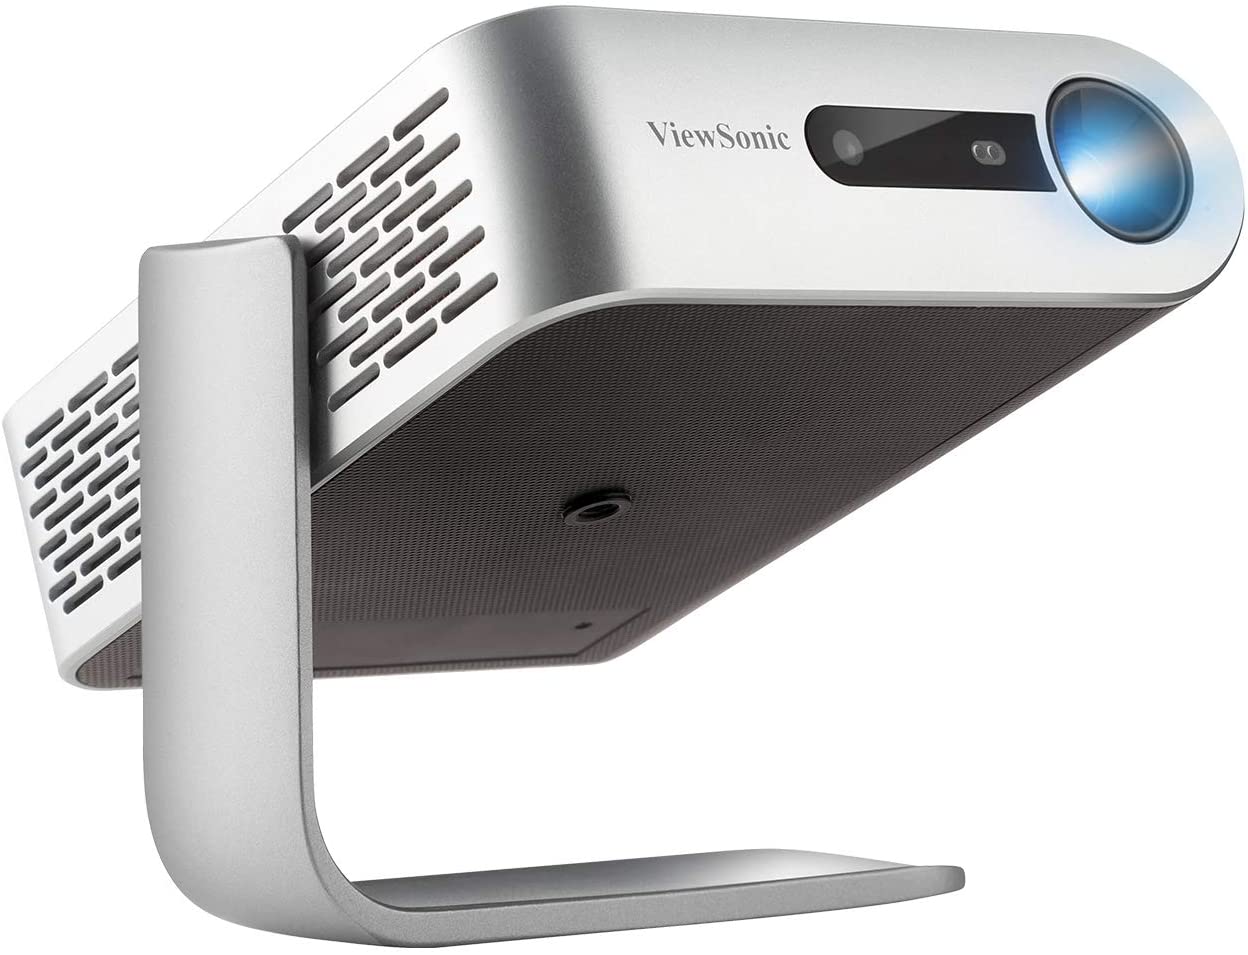 ViewSonic M1 Portable LED Projector (Best 1080P Projector Under 300):